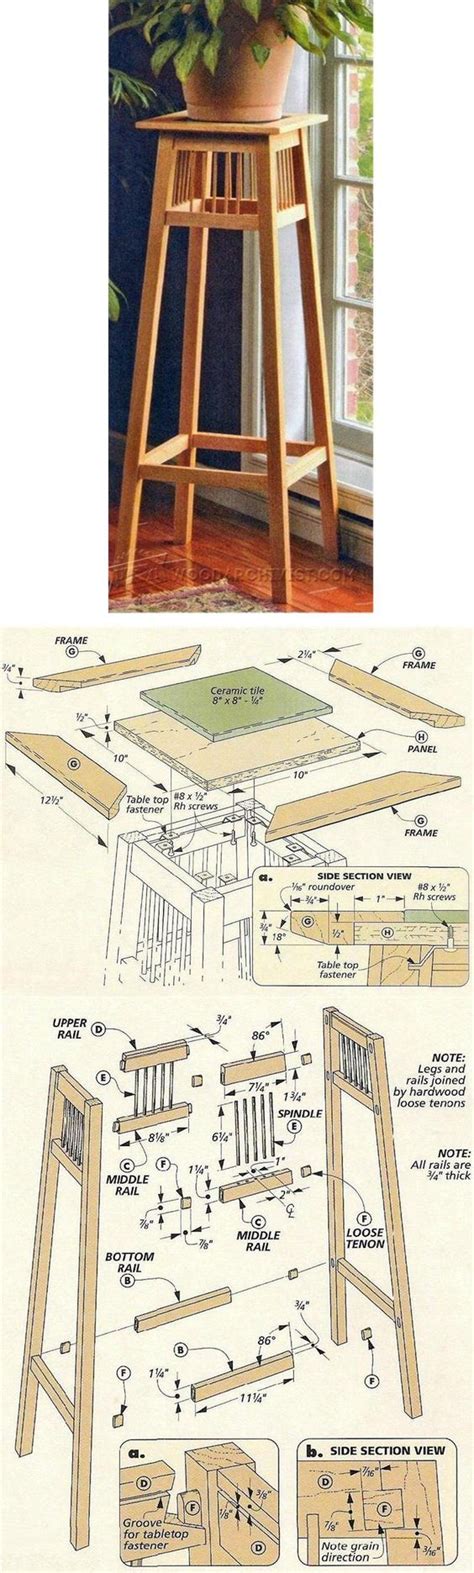 Diy Plant Stand Furniture Plans And Projects Woodarchivist Com